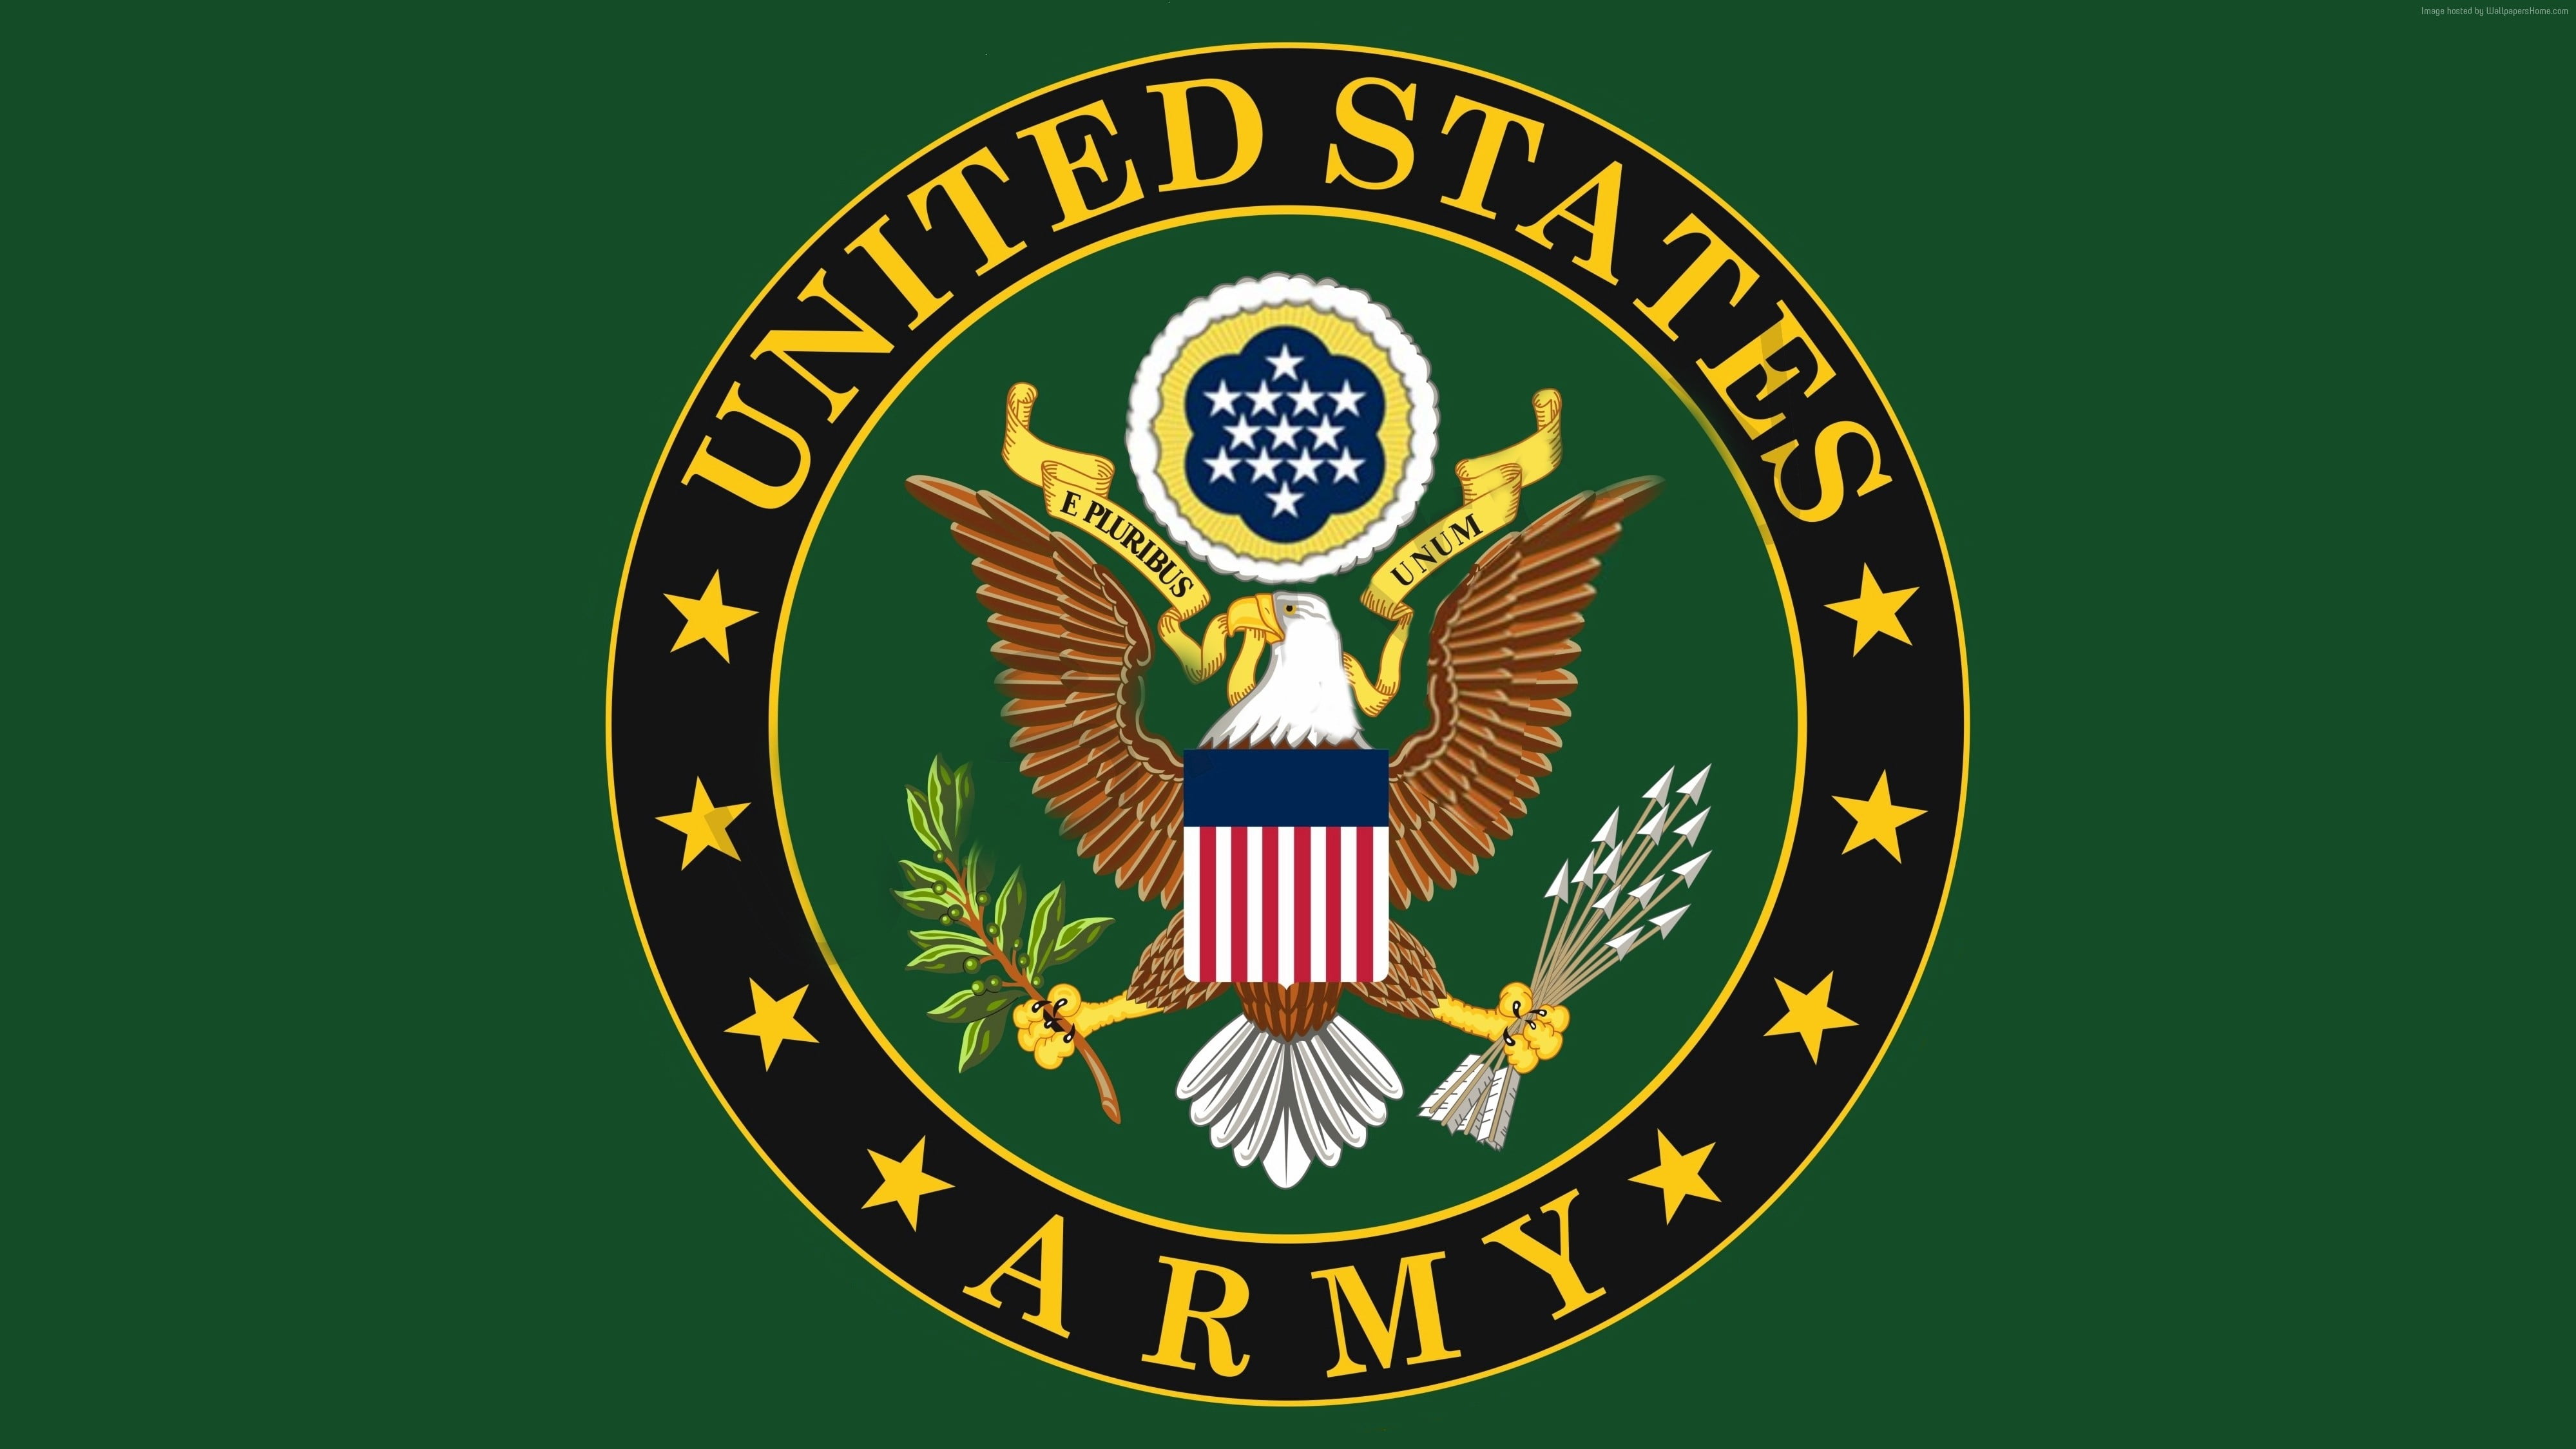 United States Army logo HD wallpaper Wallpaper Flare